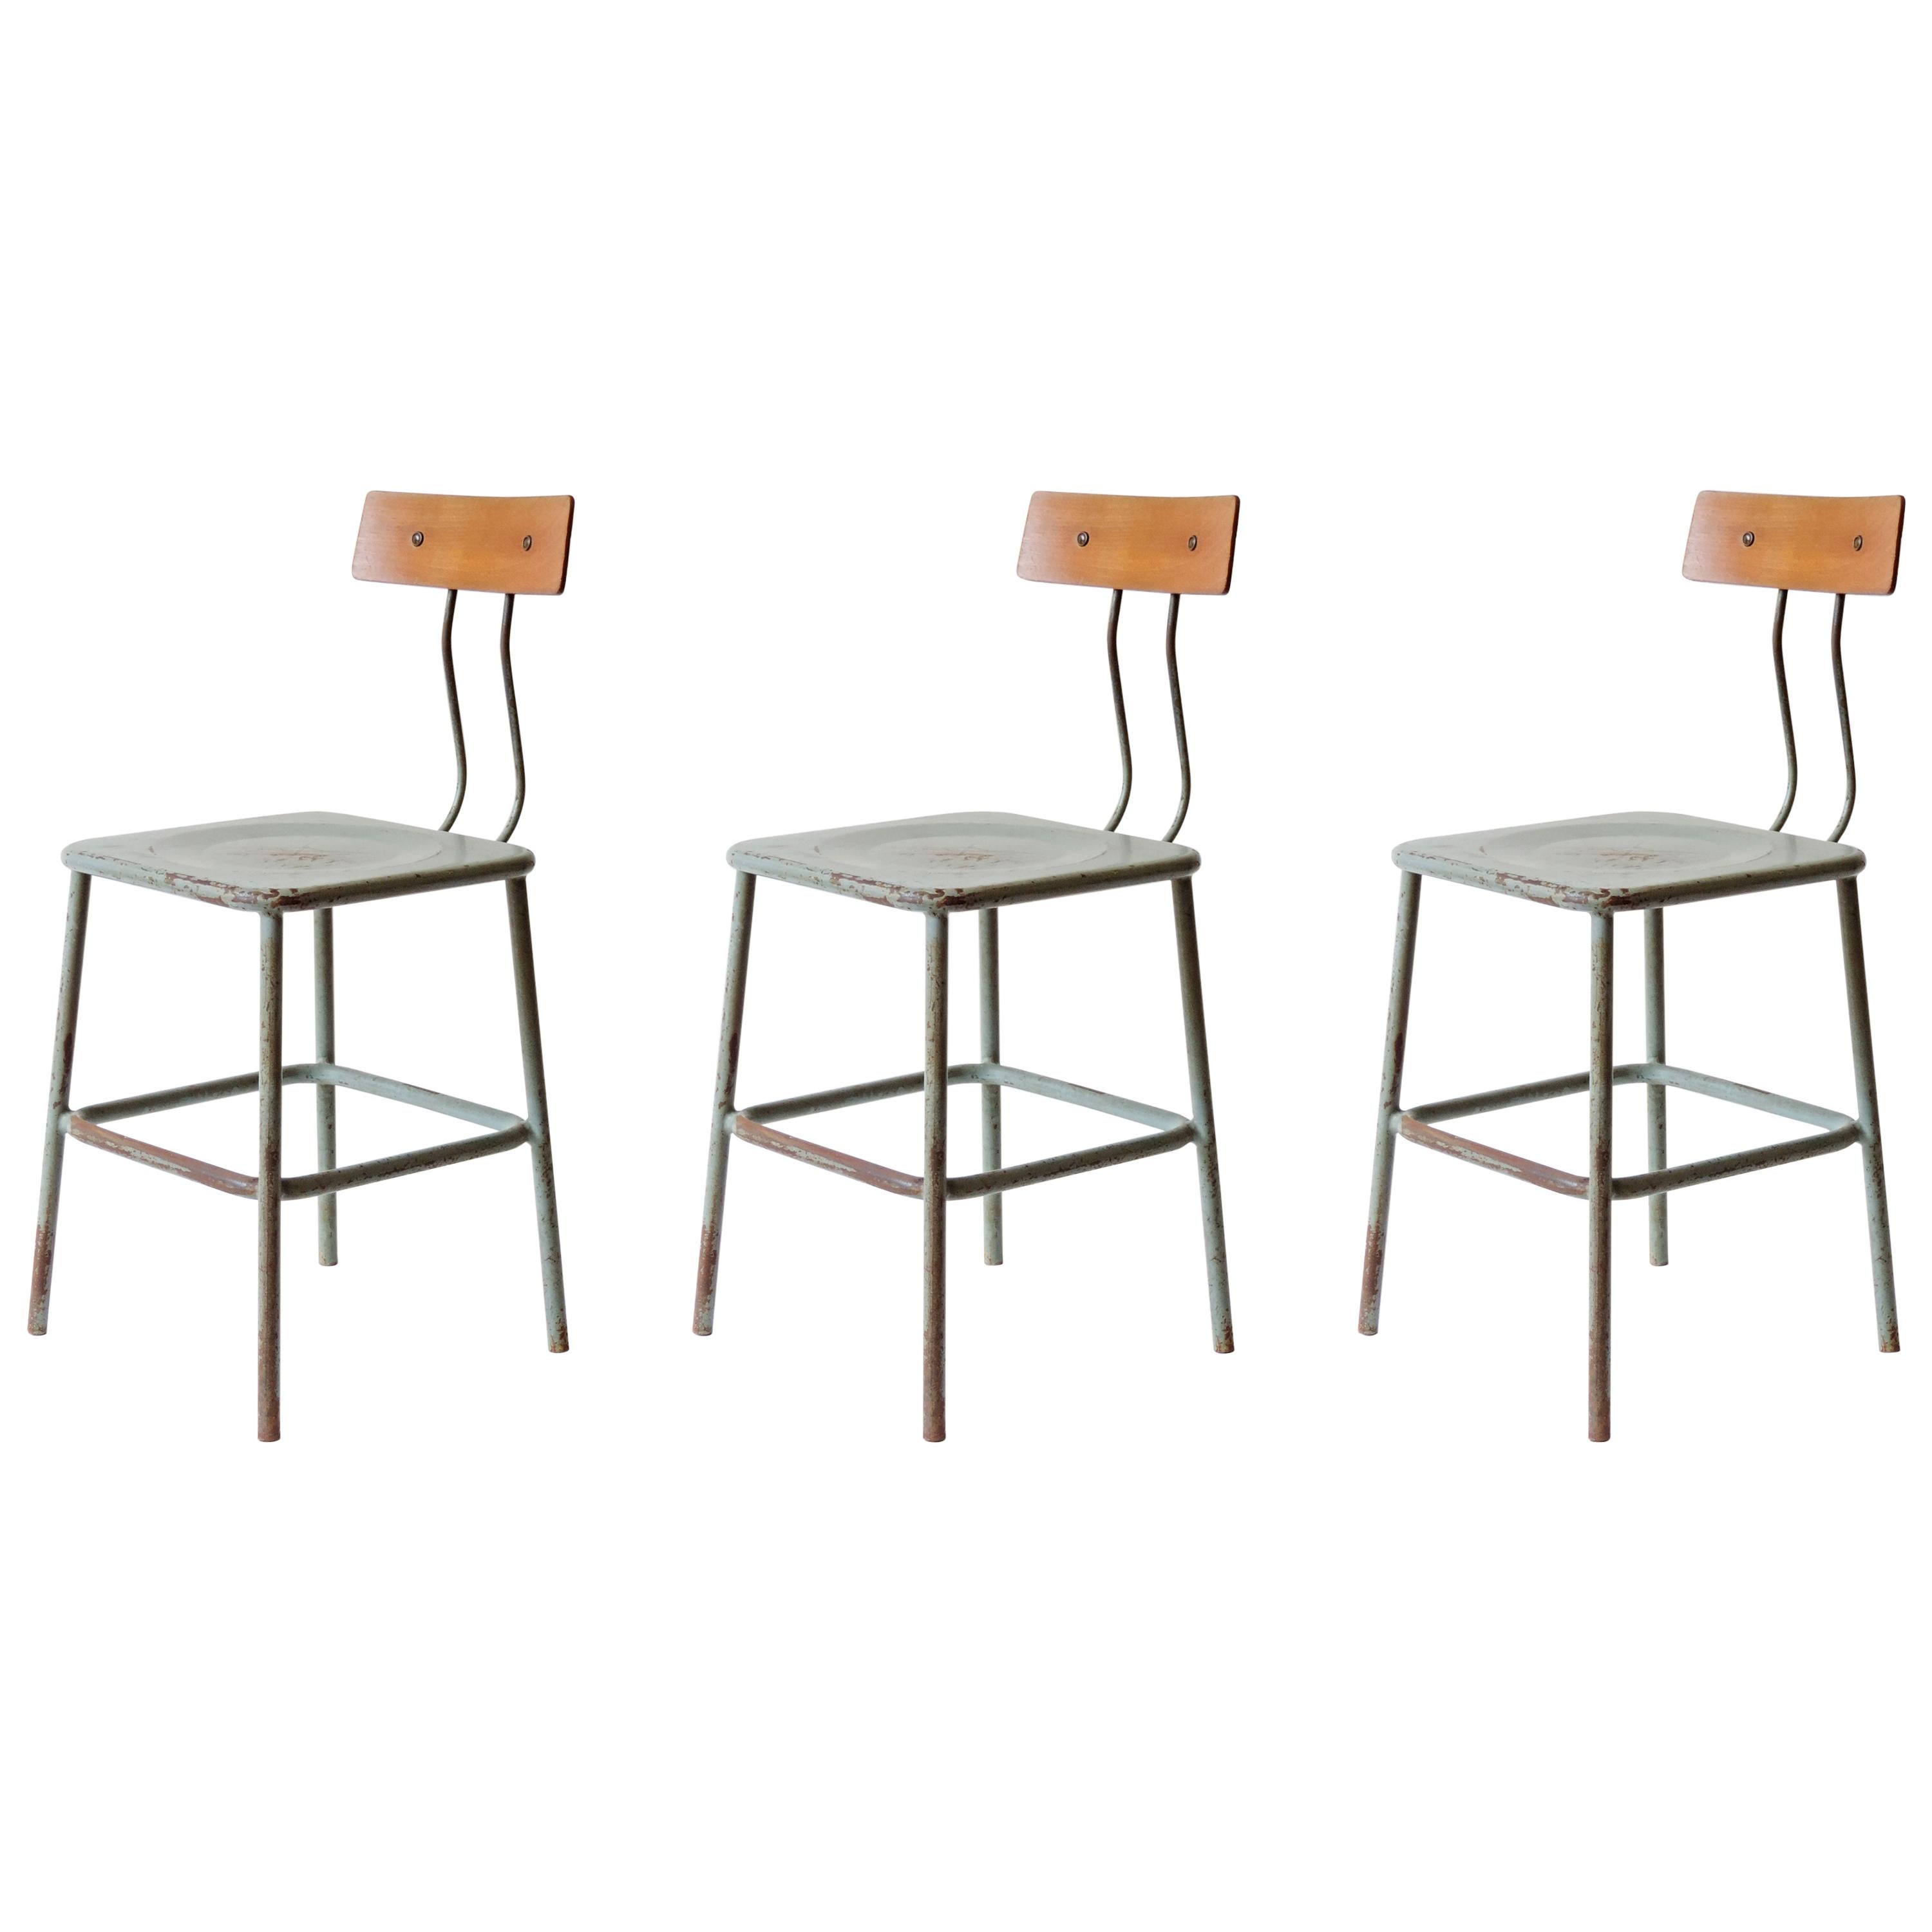 Set of Three Italian Industrial Chairs, Italy, 1950s